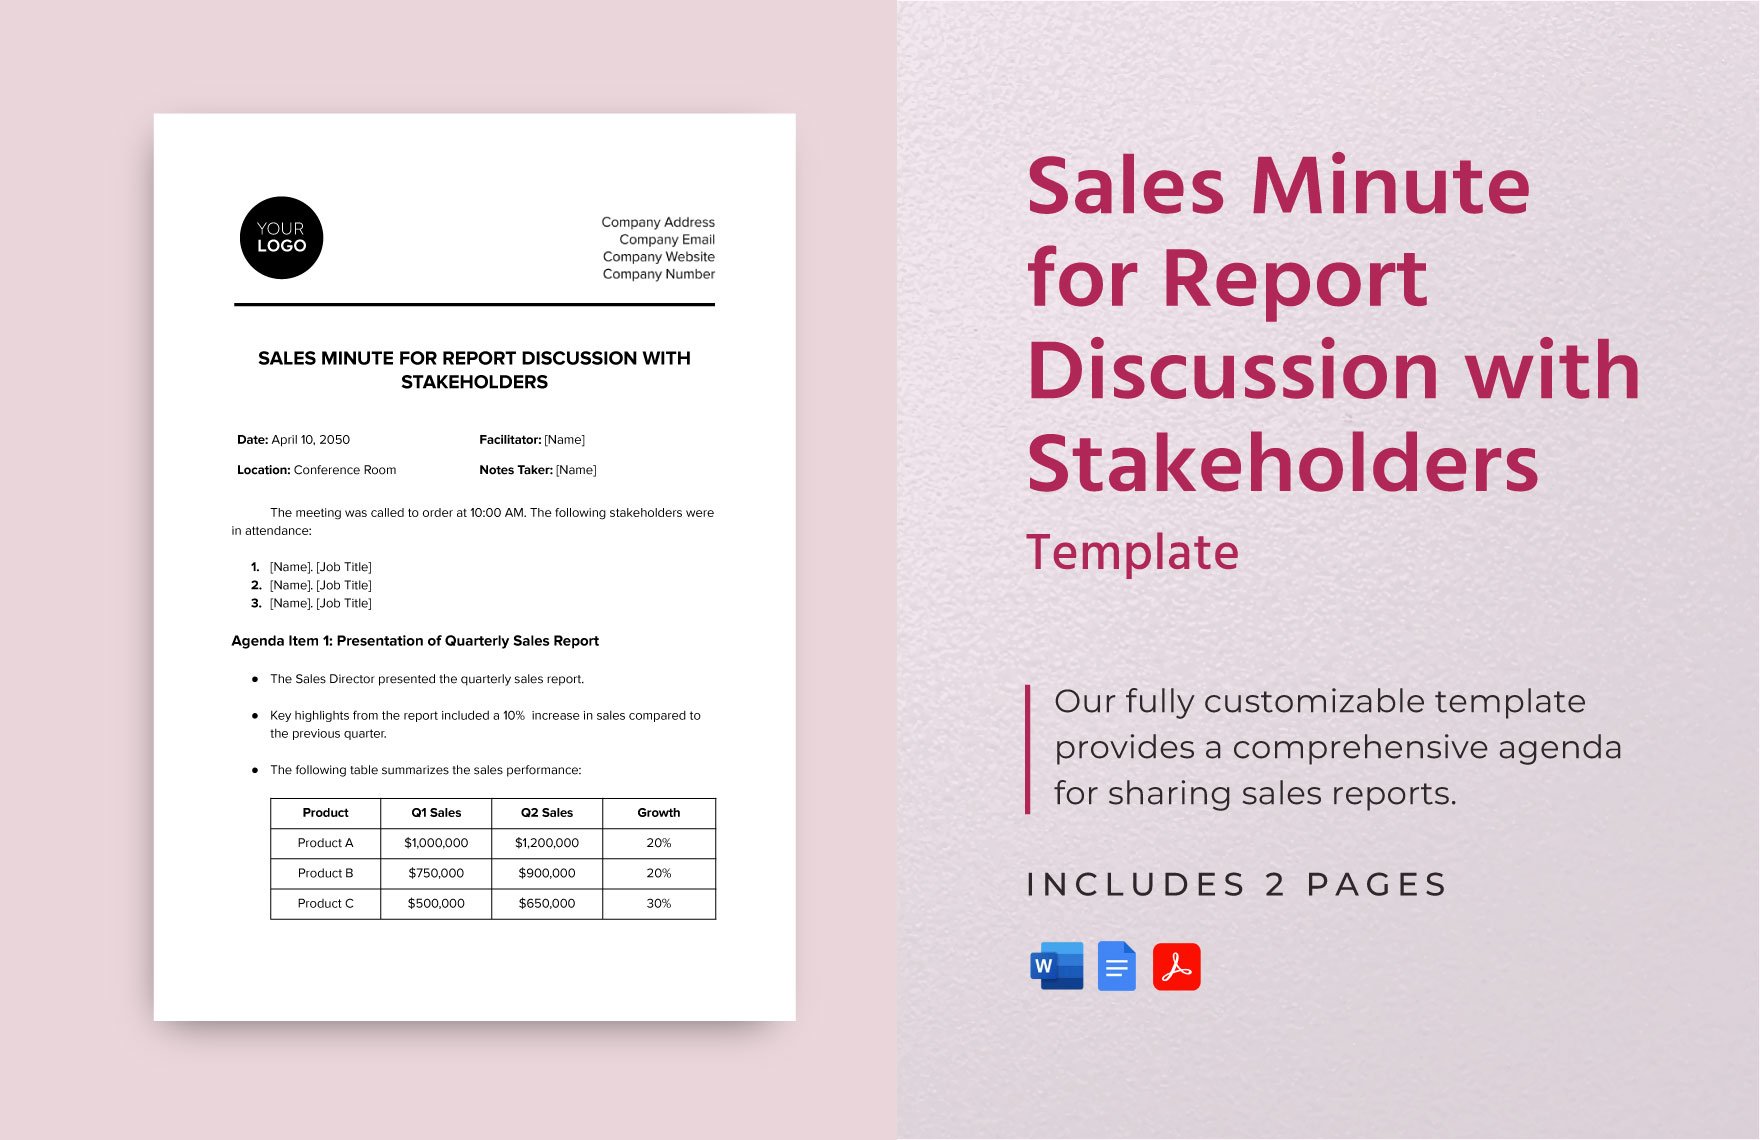 Sales Minute for Report Discussion with Stakeholders Template